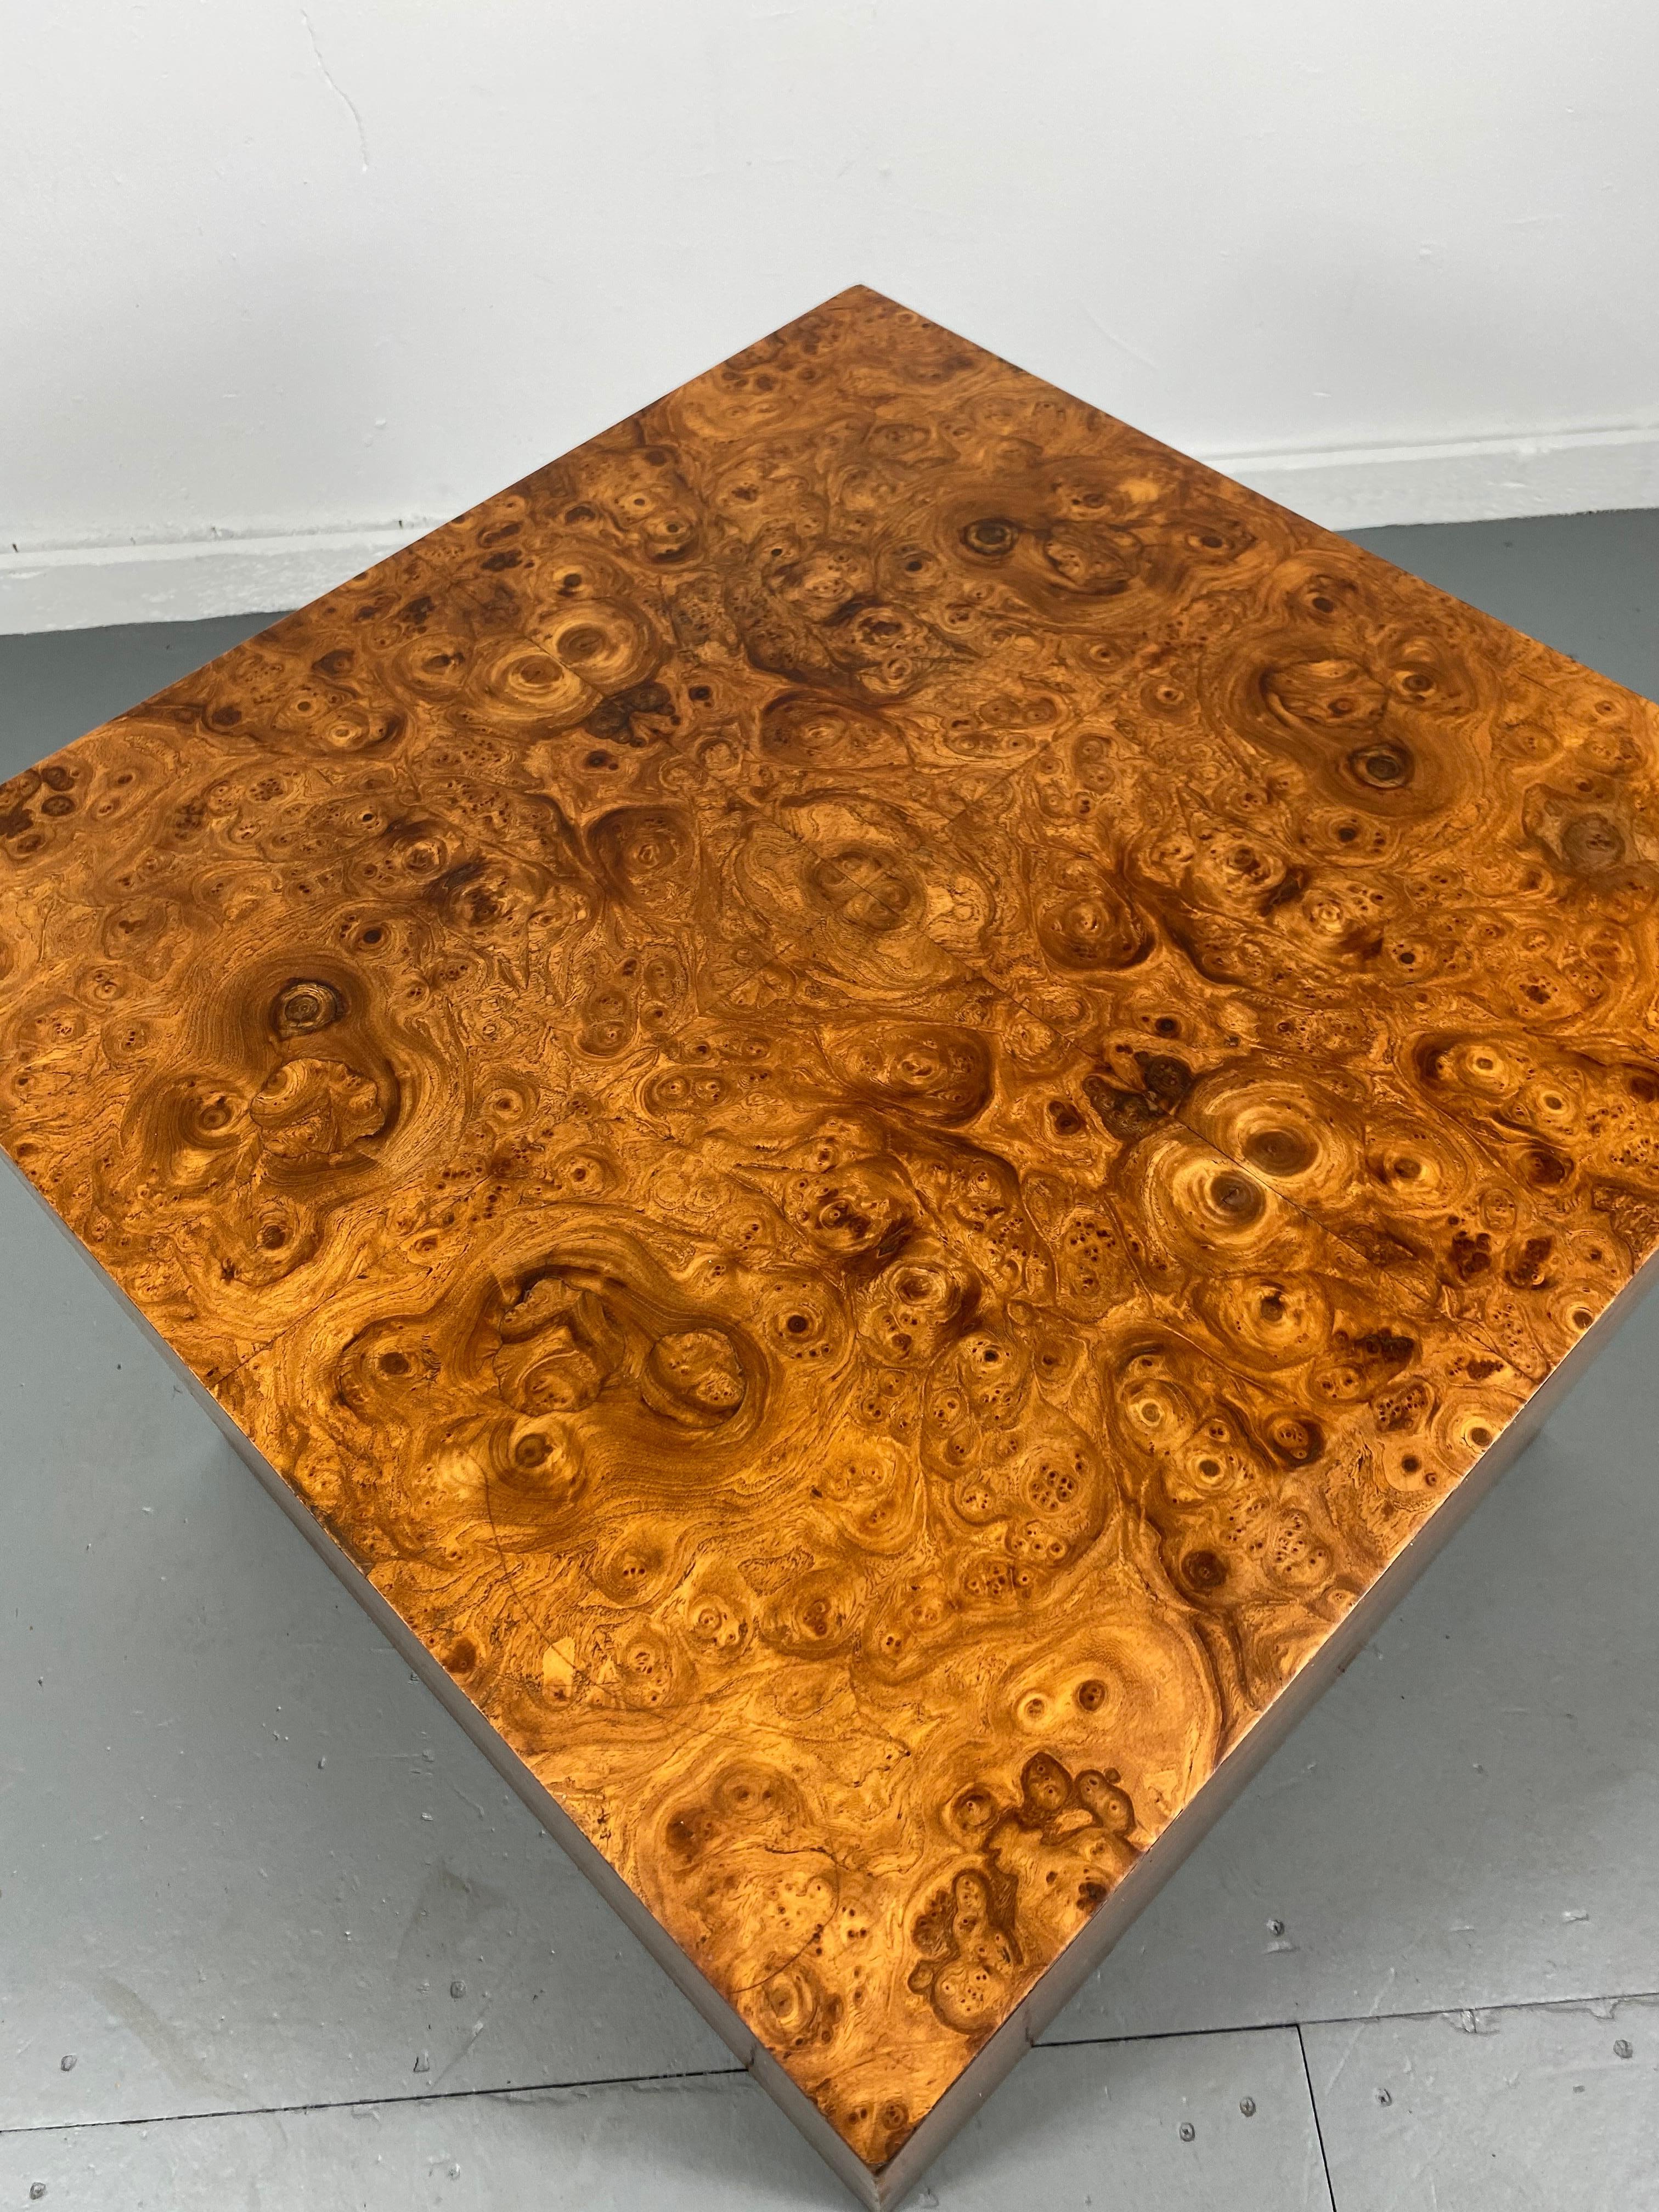 Stunning burl wood cube table / pedestal by Milo Baughman, retains original finish /patina, Wonderful condition. Classic modernist design, hand delivery avail to New York City or anywhere en route from Buffalo NY.